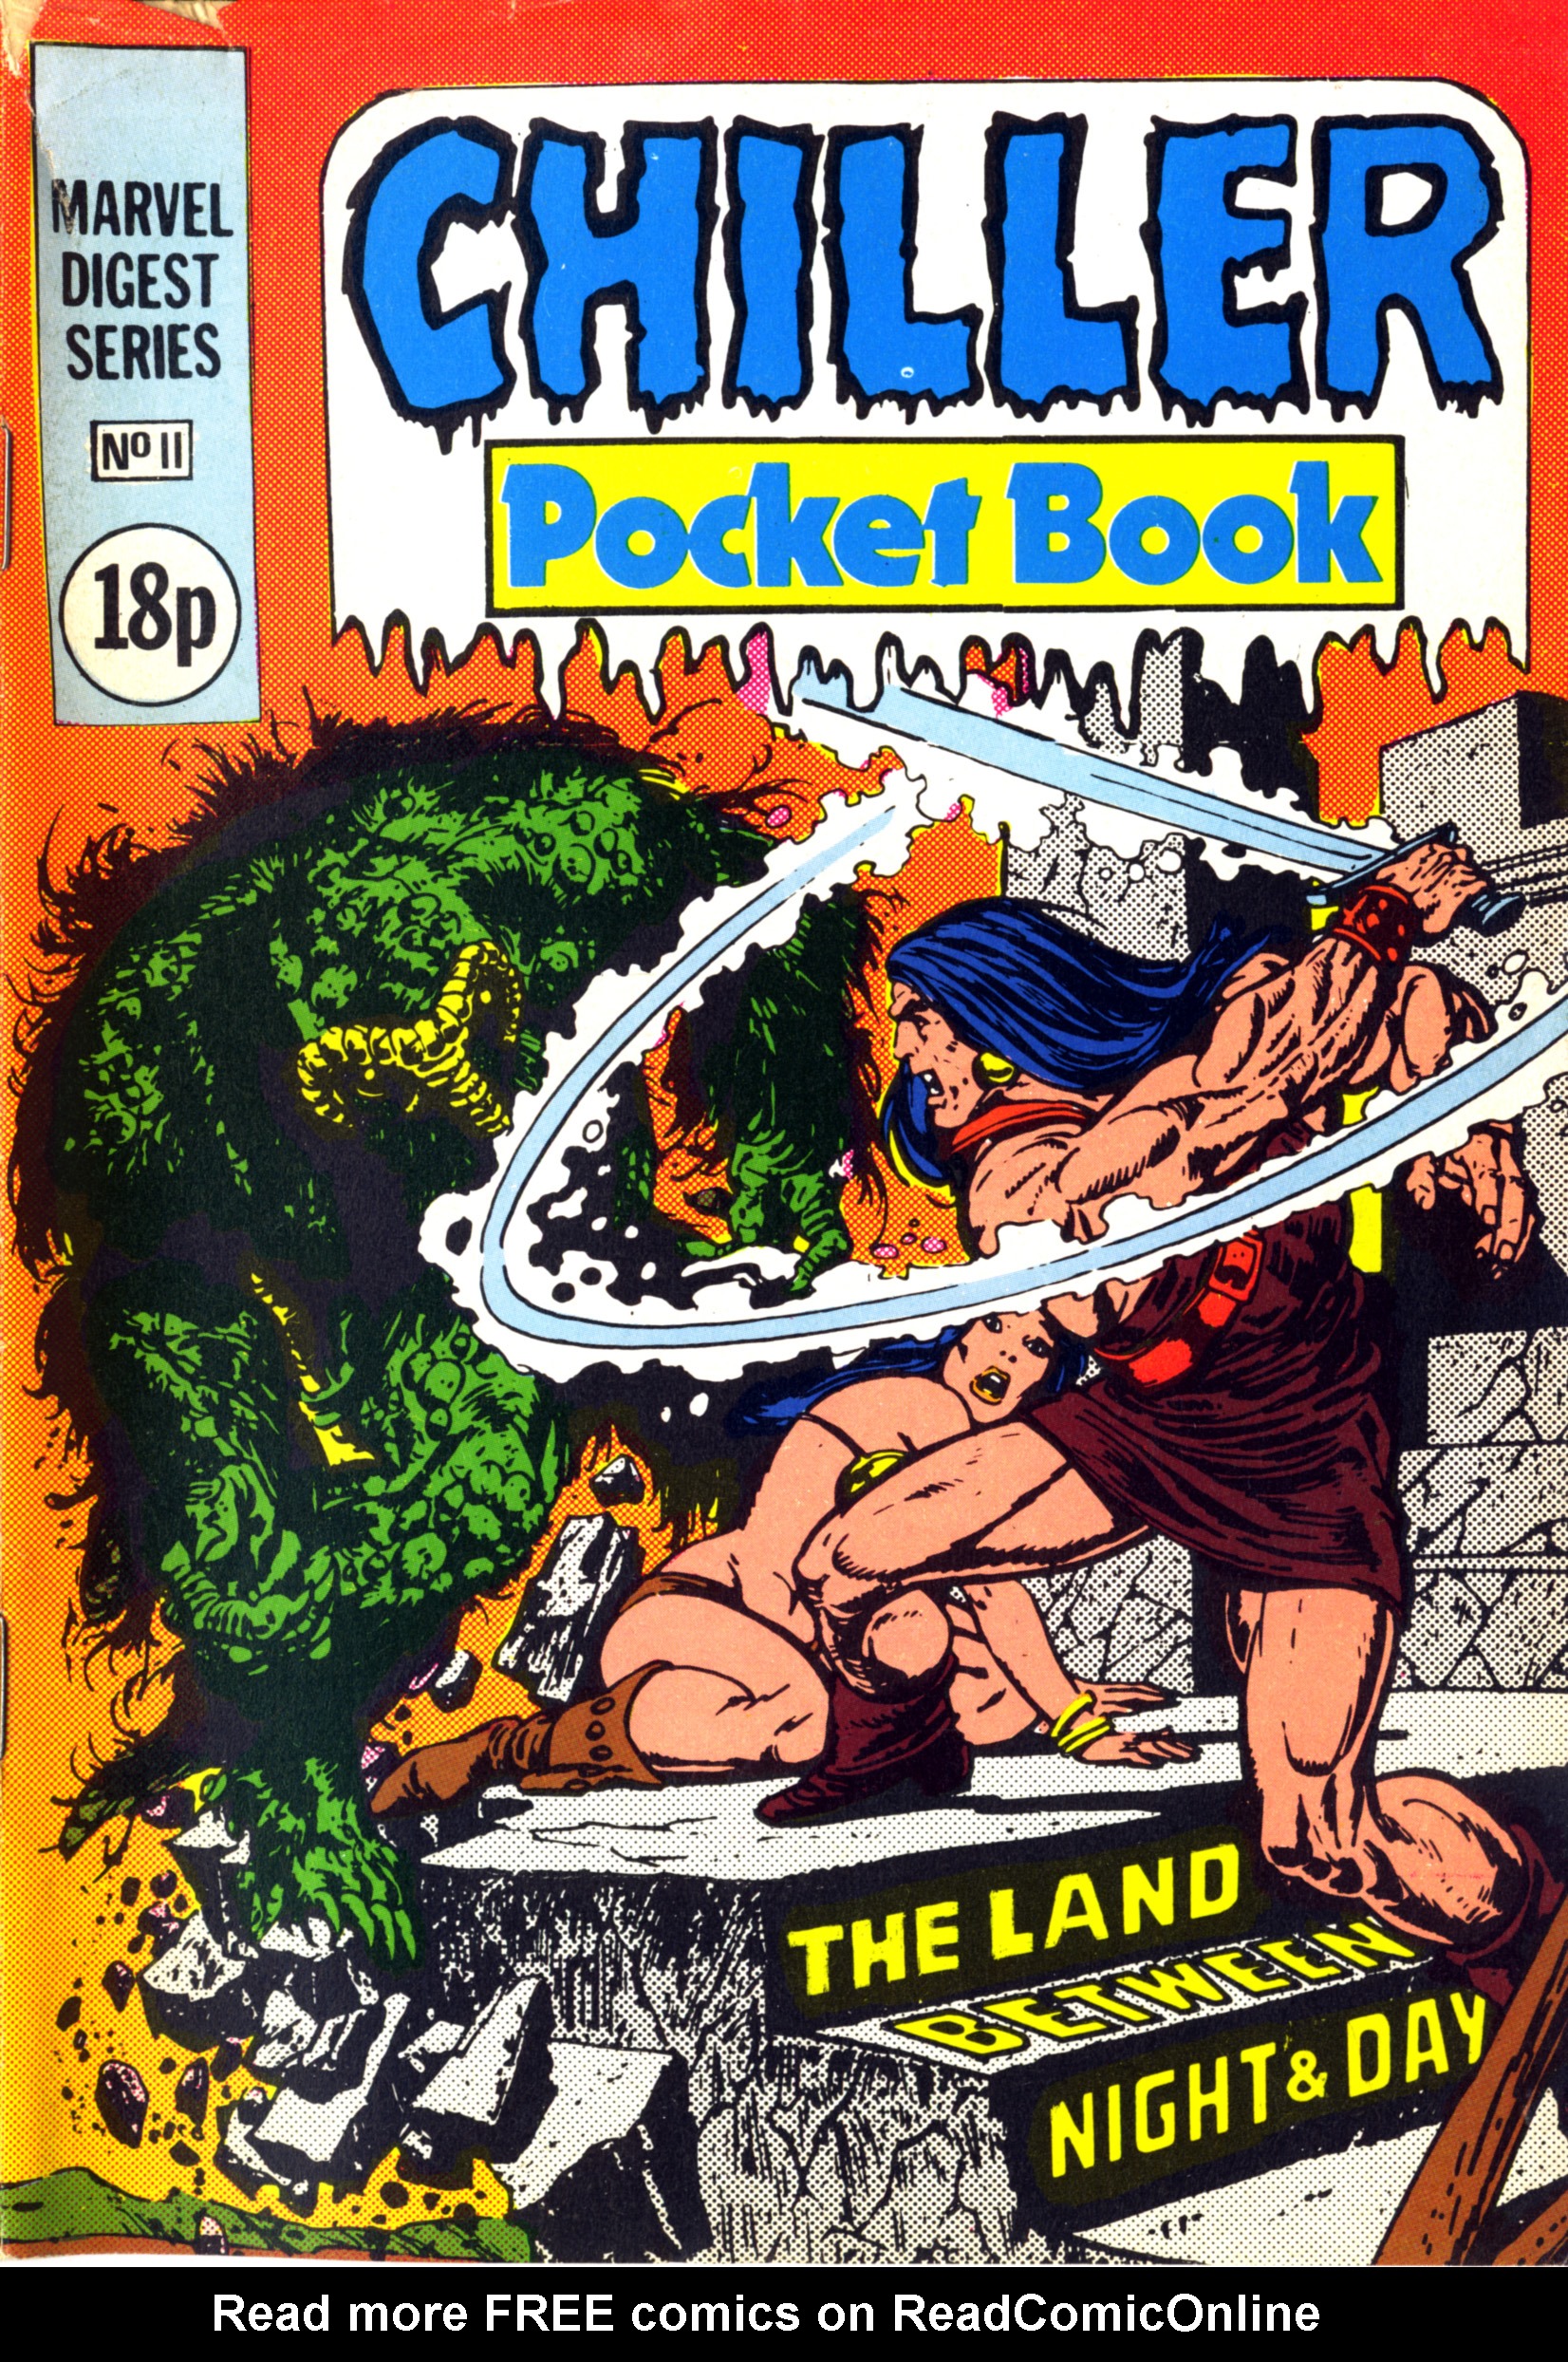 Read online Chiller Pocket Book comic -  Issue #11 - 2